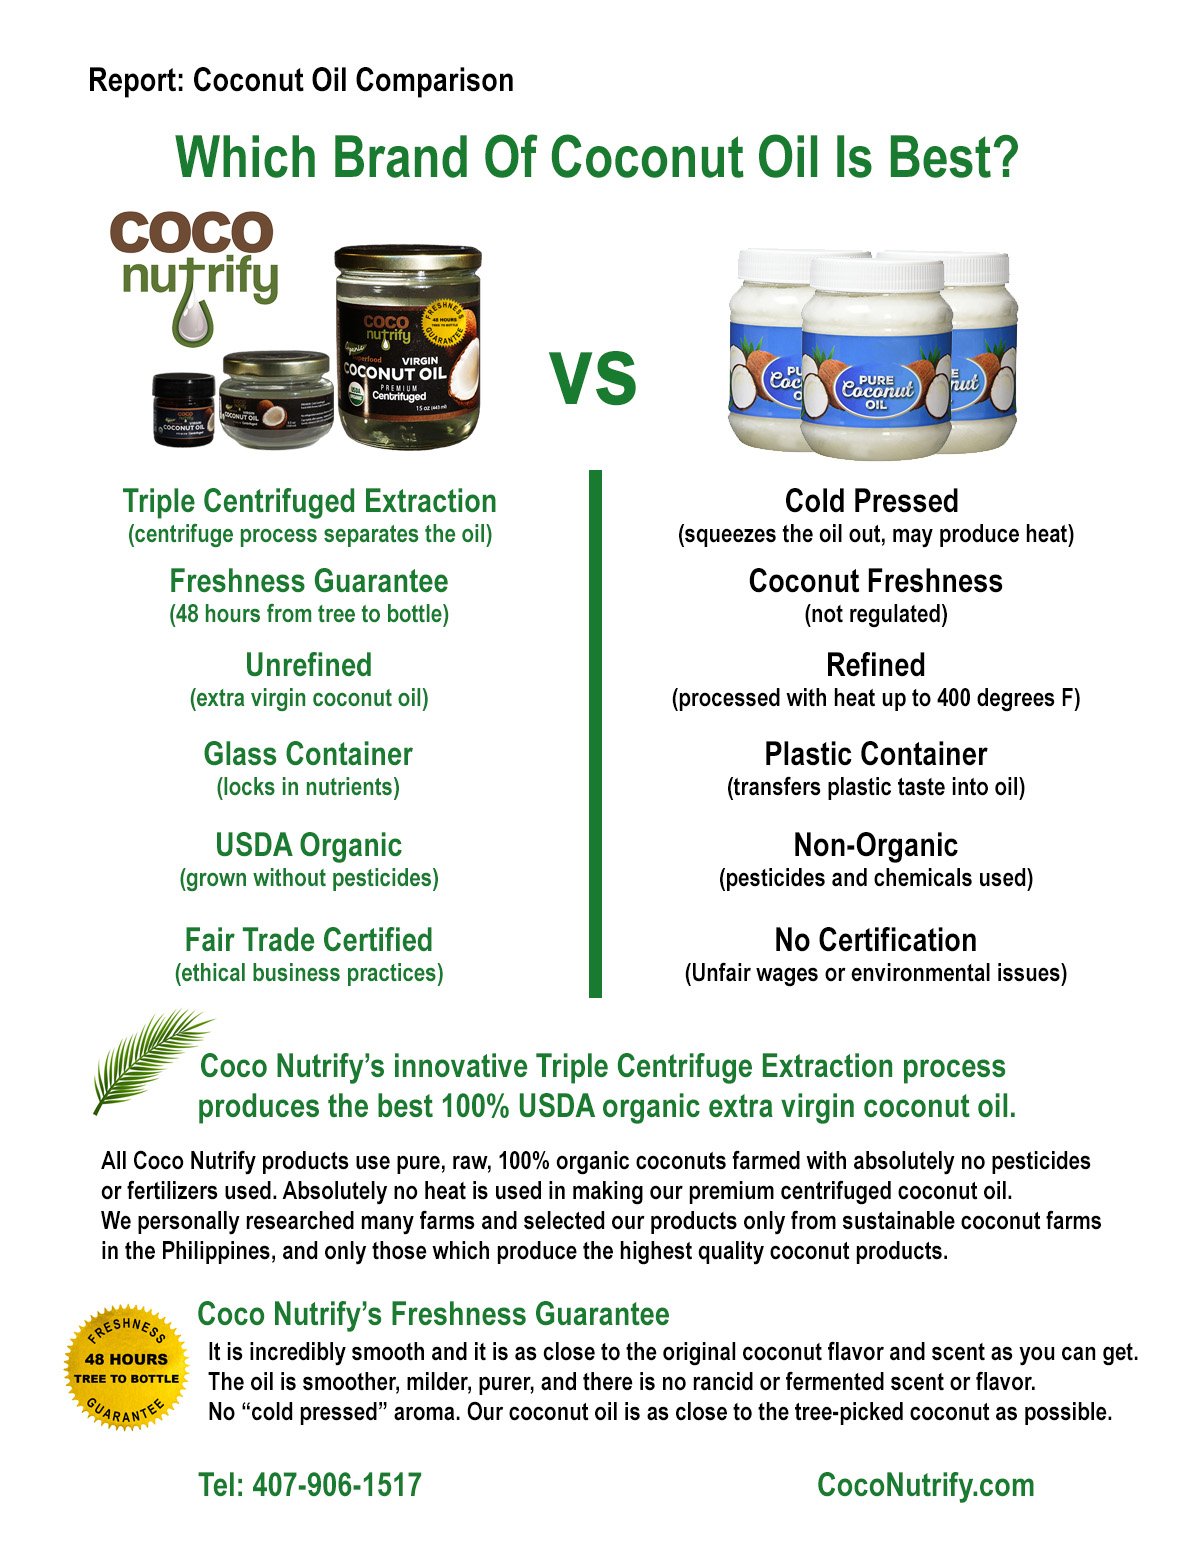 Products - COCO NUTRIFY